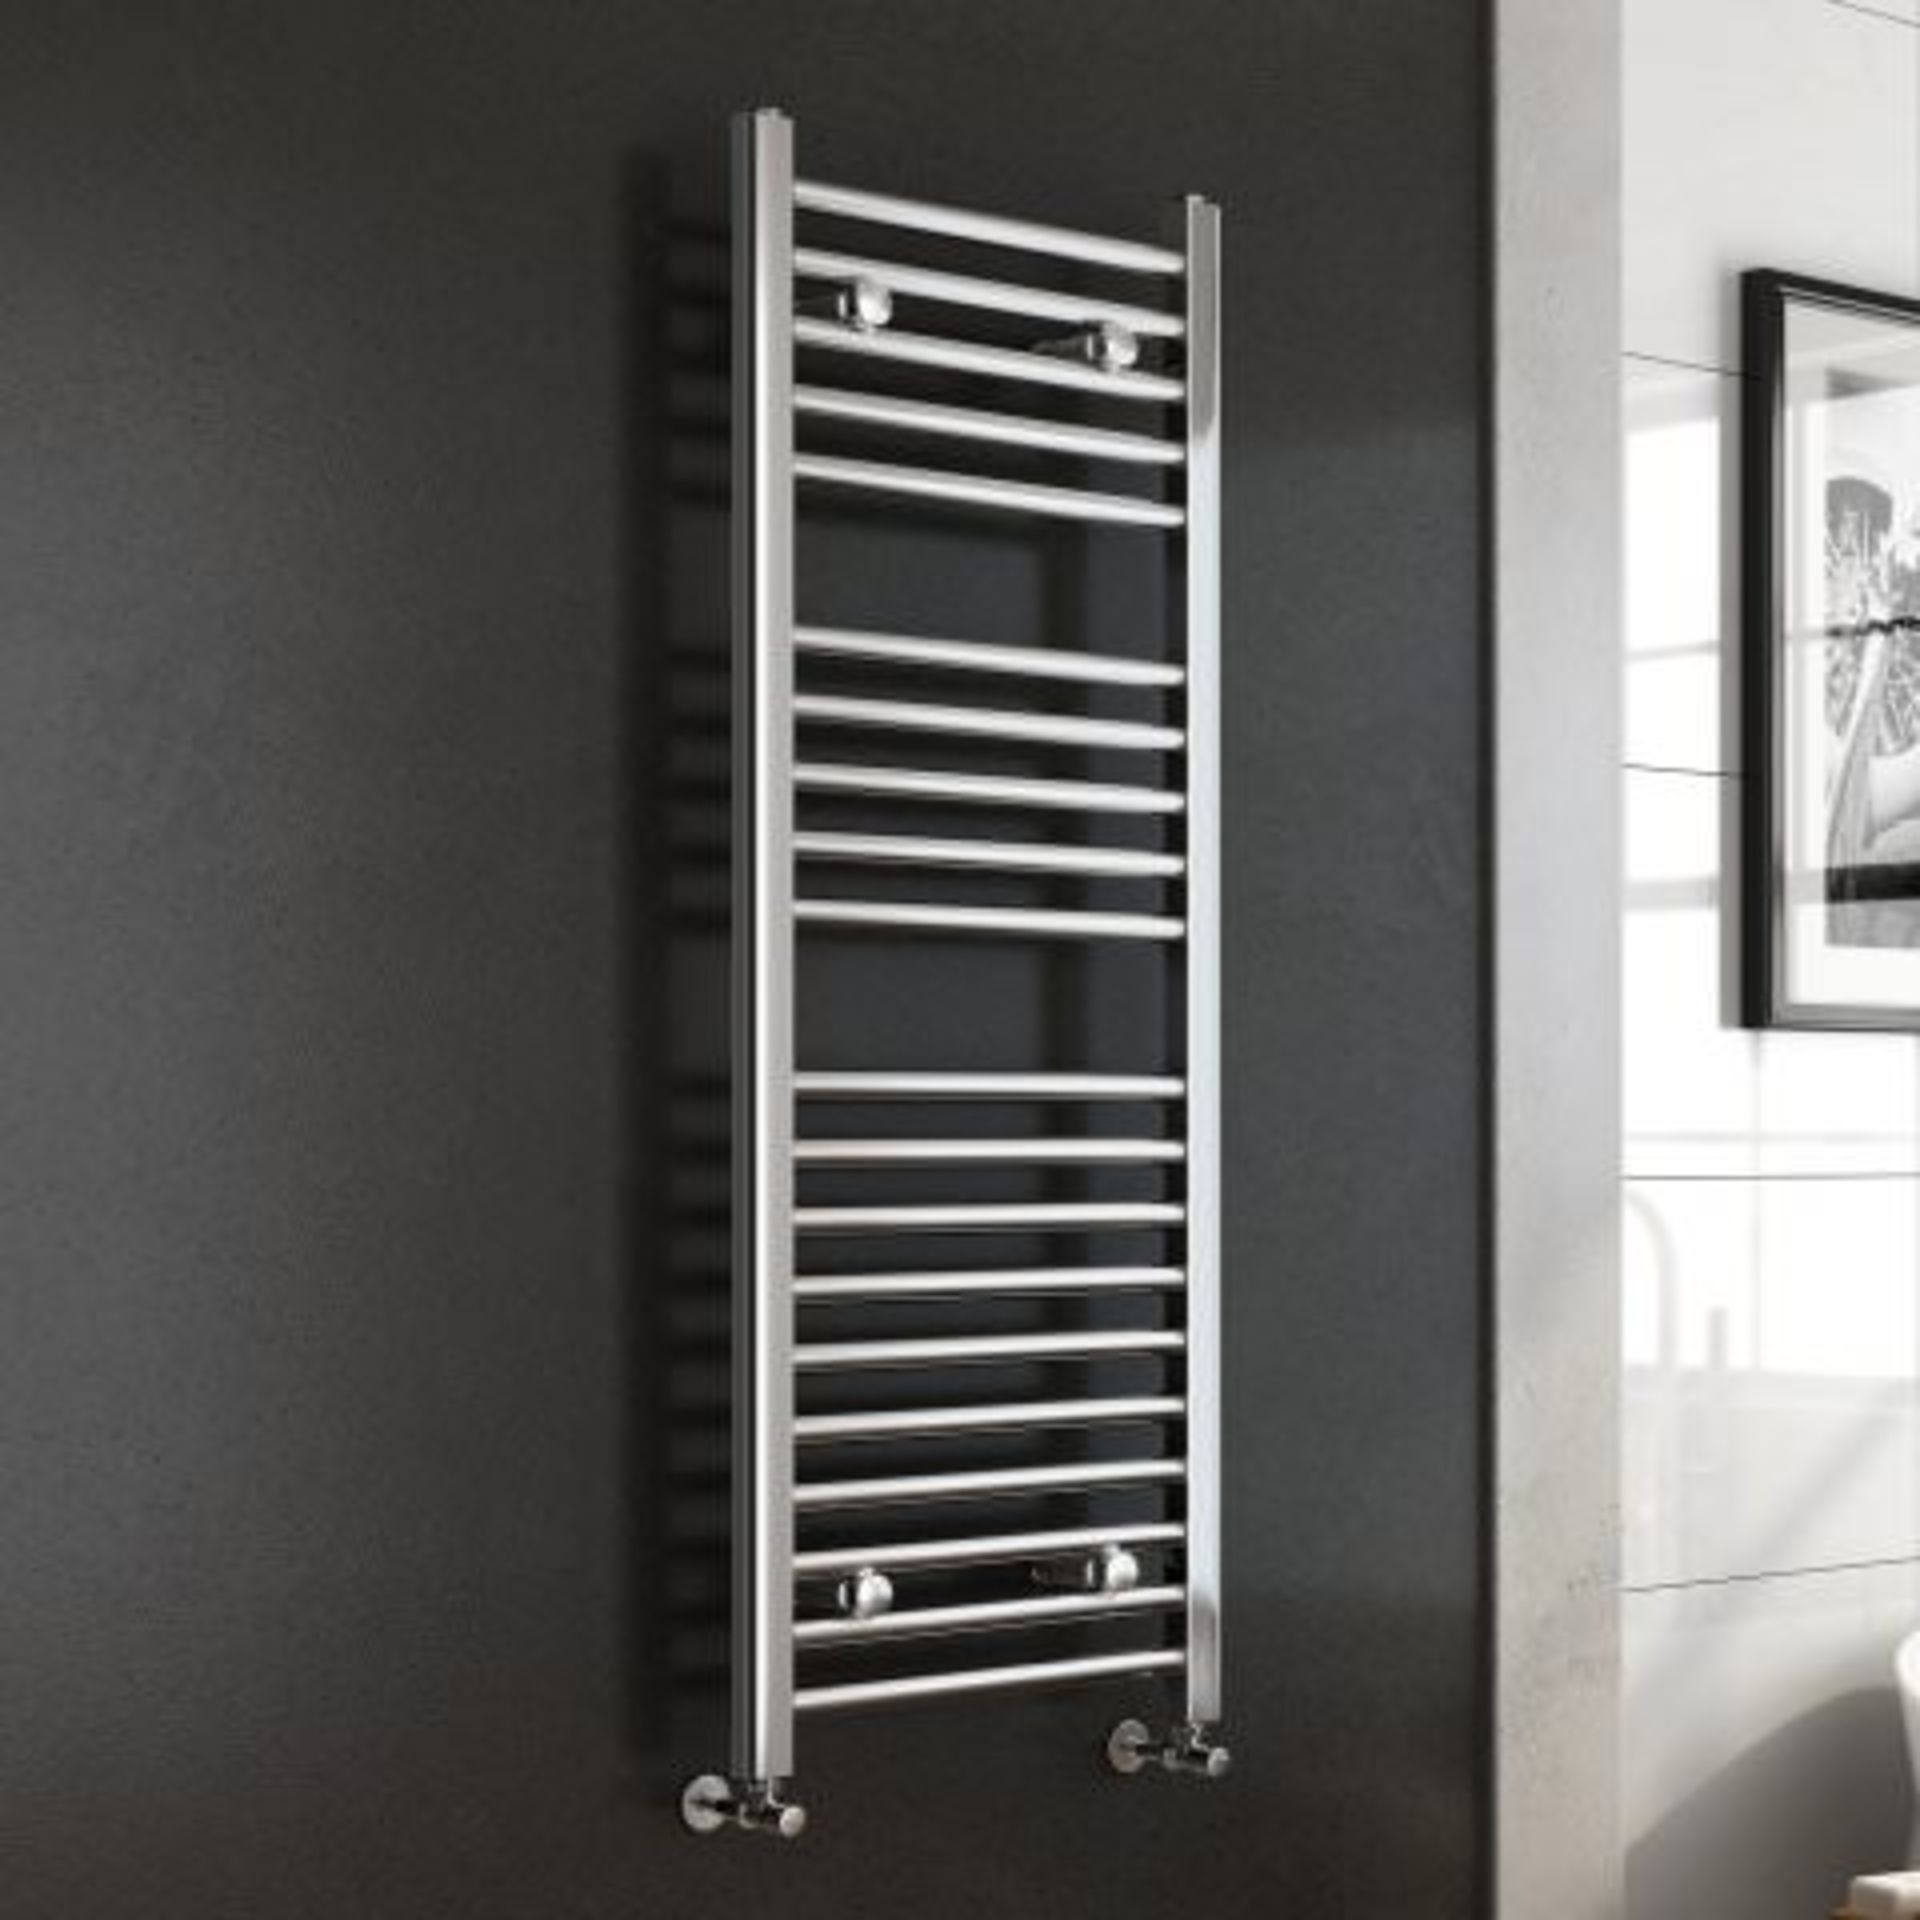 (L44) 1200x450mm - 25mm Tubes - Chrome Heated Straight Rail Ladder Towel Radiator Benefit from the - Image 4 of 8